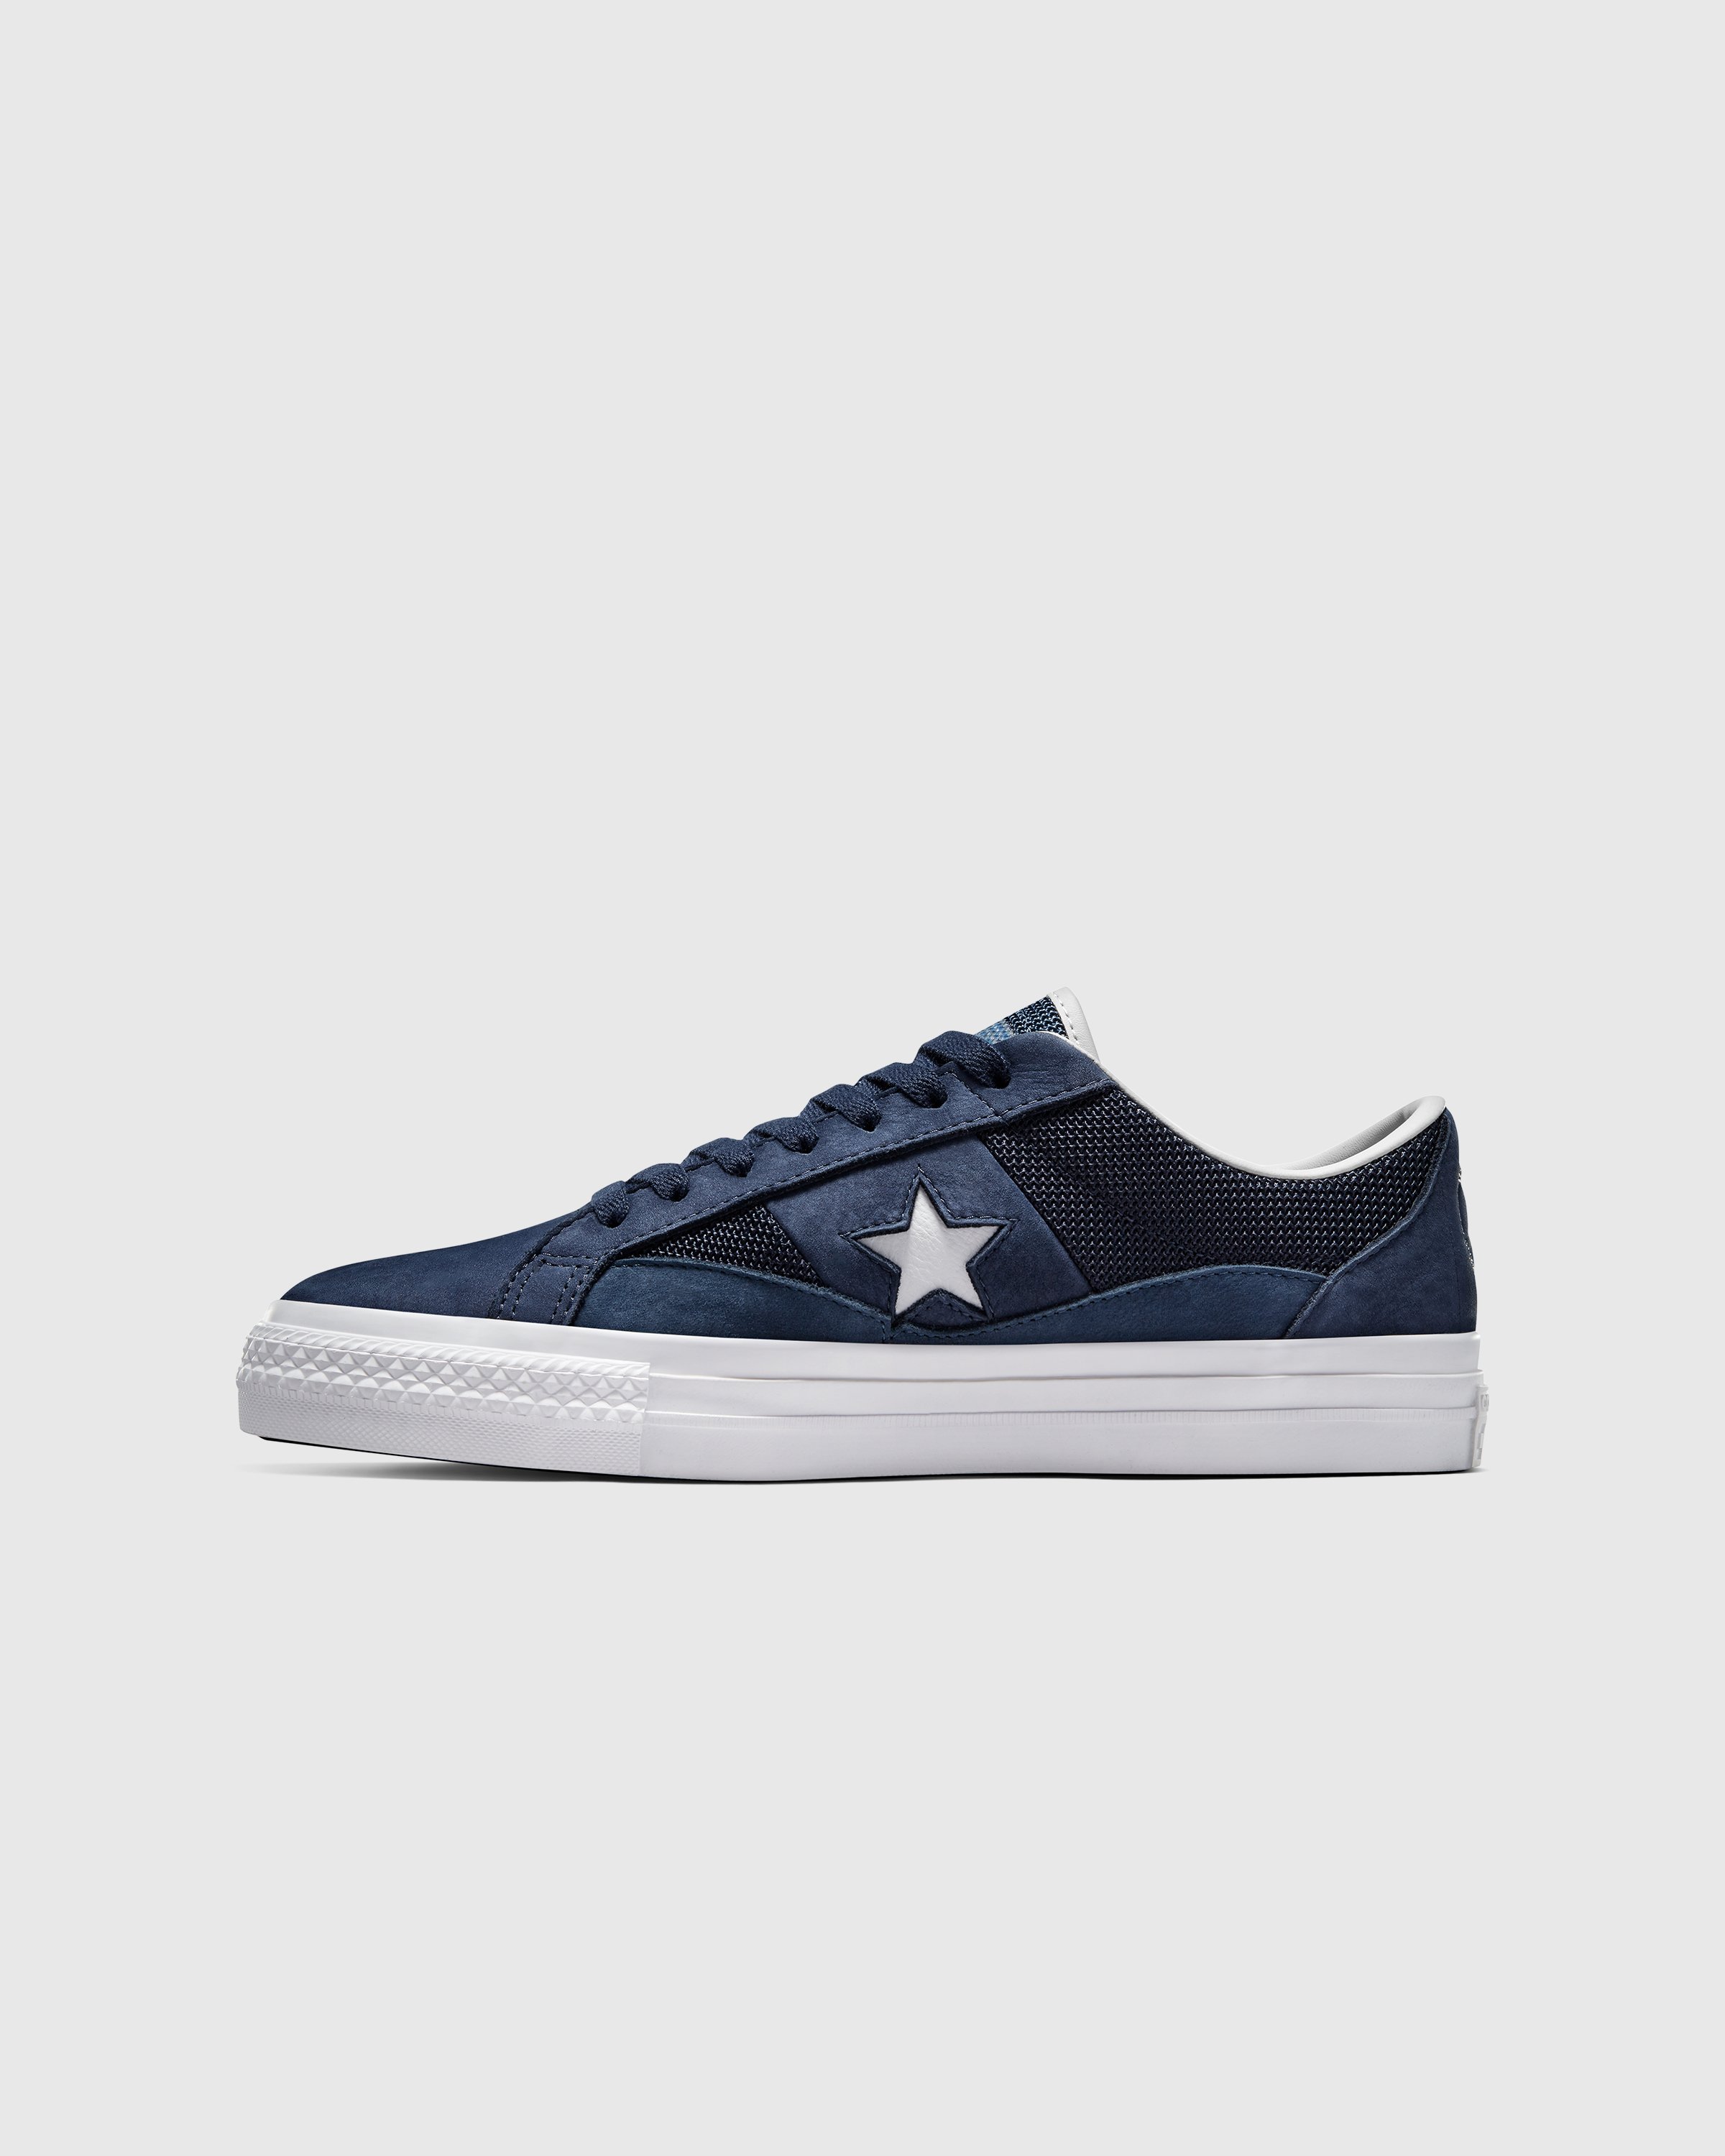 Converse - CONS x Alltimers ONE STAR PRO OX Midnight Navy/Navy - Footwear - Blue - Image 2